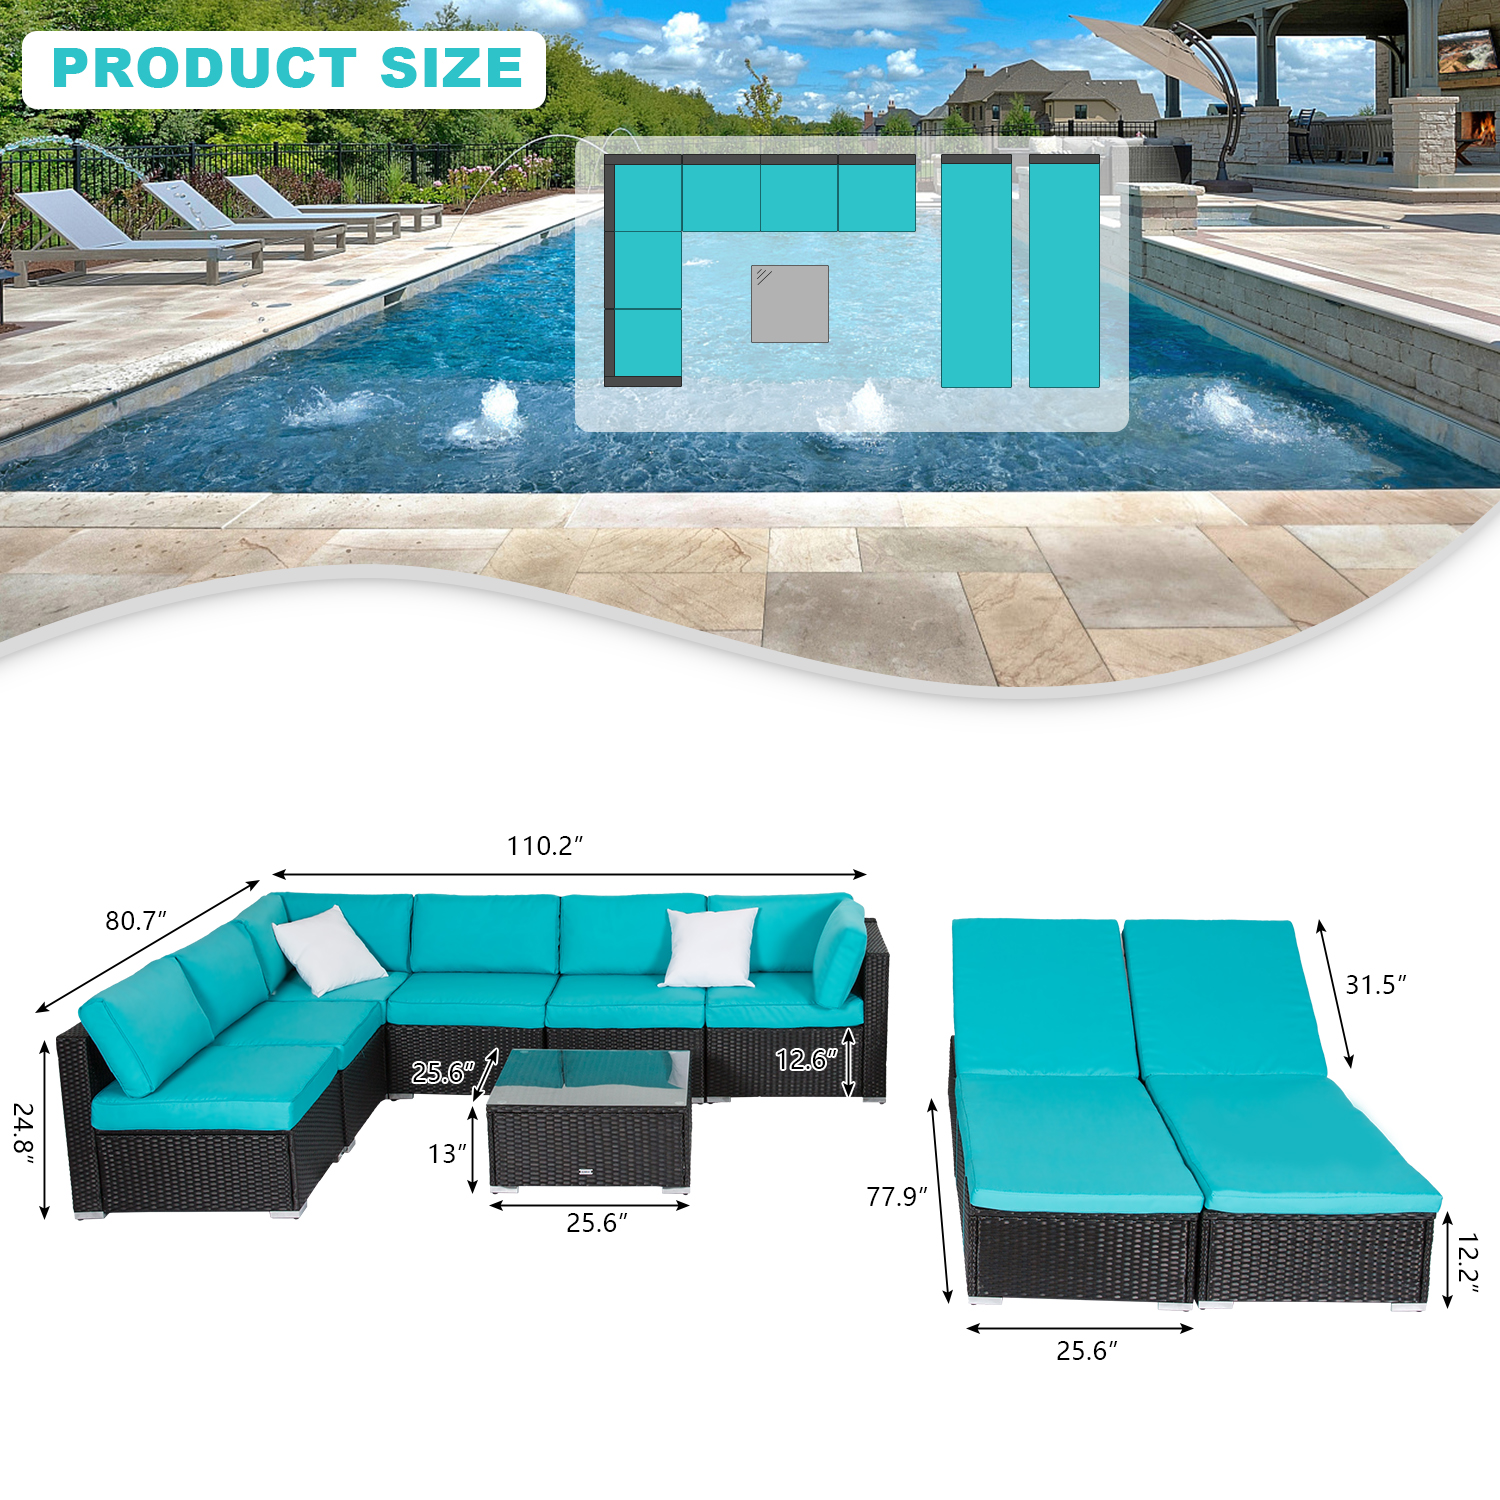 Kinbor 9pcs Outdoor Patio Furniture Sectional Pe Rattan Wicker Rattan Sofa Set with Chaise Lounge Chair, Turquoise - image 4 of 9